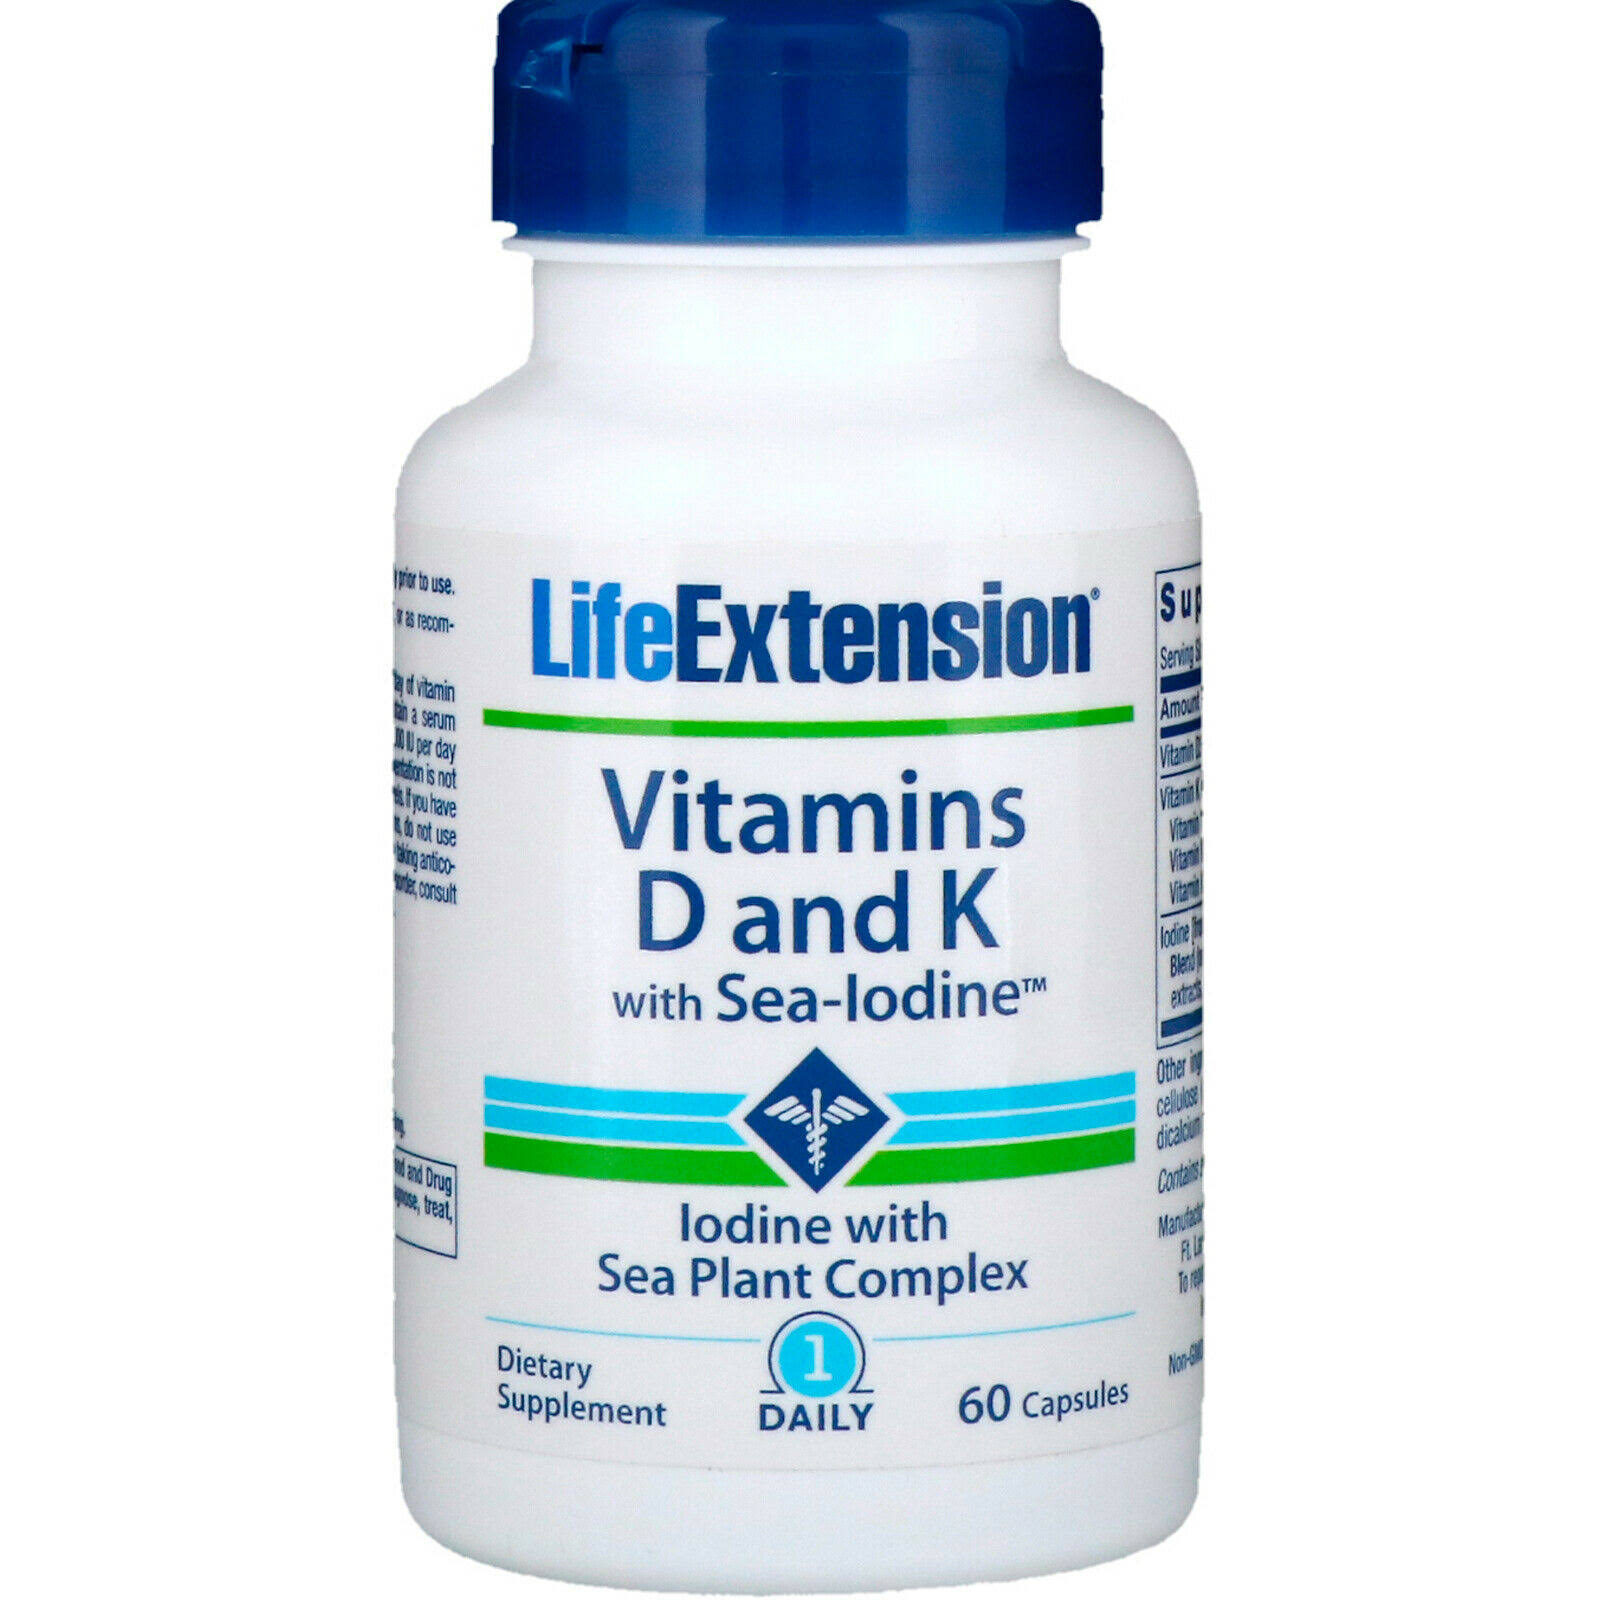 Life Extension Vitamins D and K Dietary Supplement - with Sea Iodine, 60 Capsules